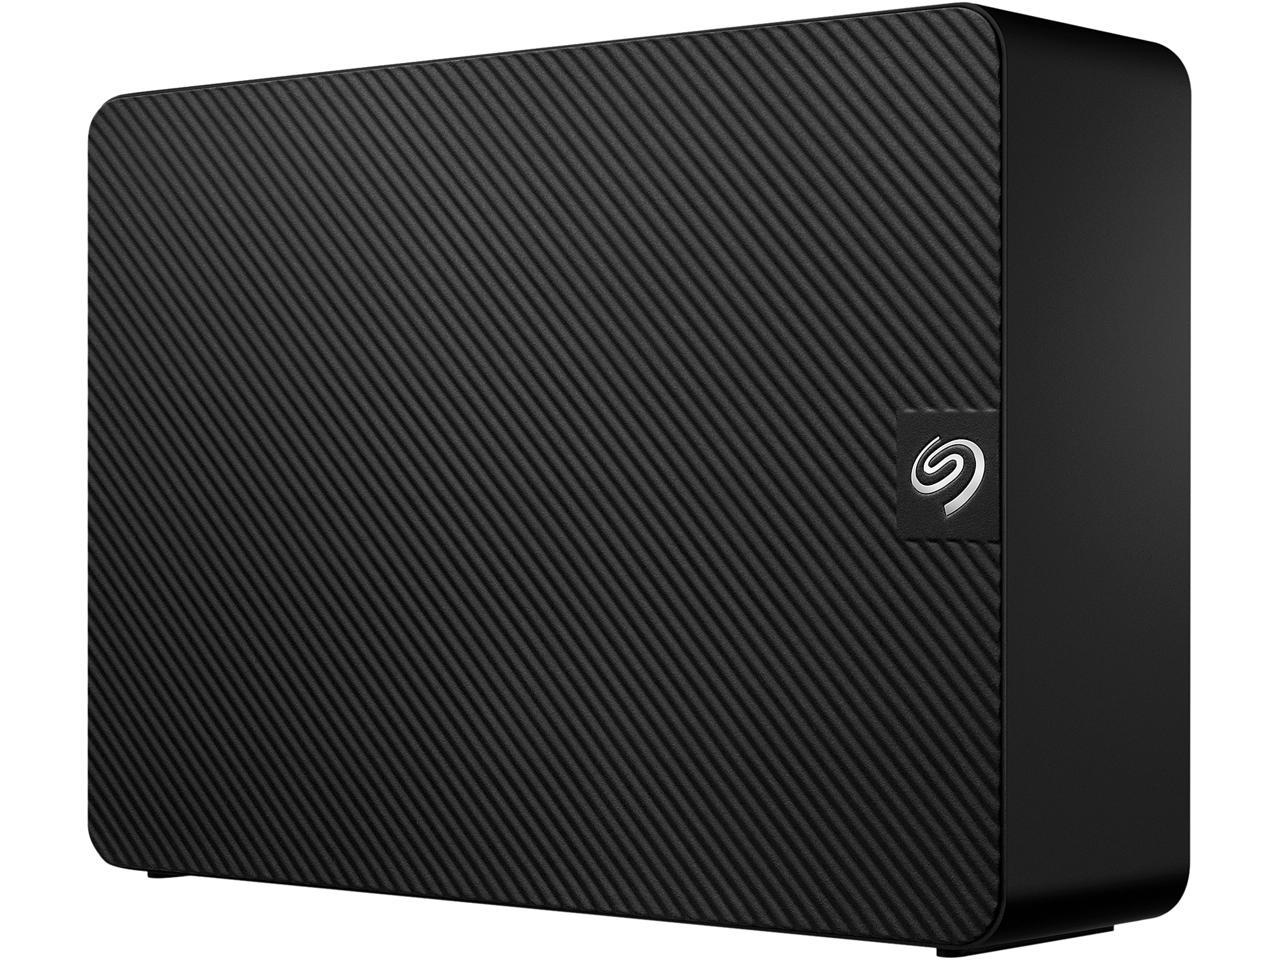 16TB Seagate Expansion External Hard Drive (w/Rescue Data Svcs) @Newegg $220